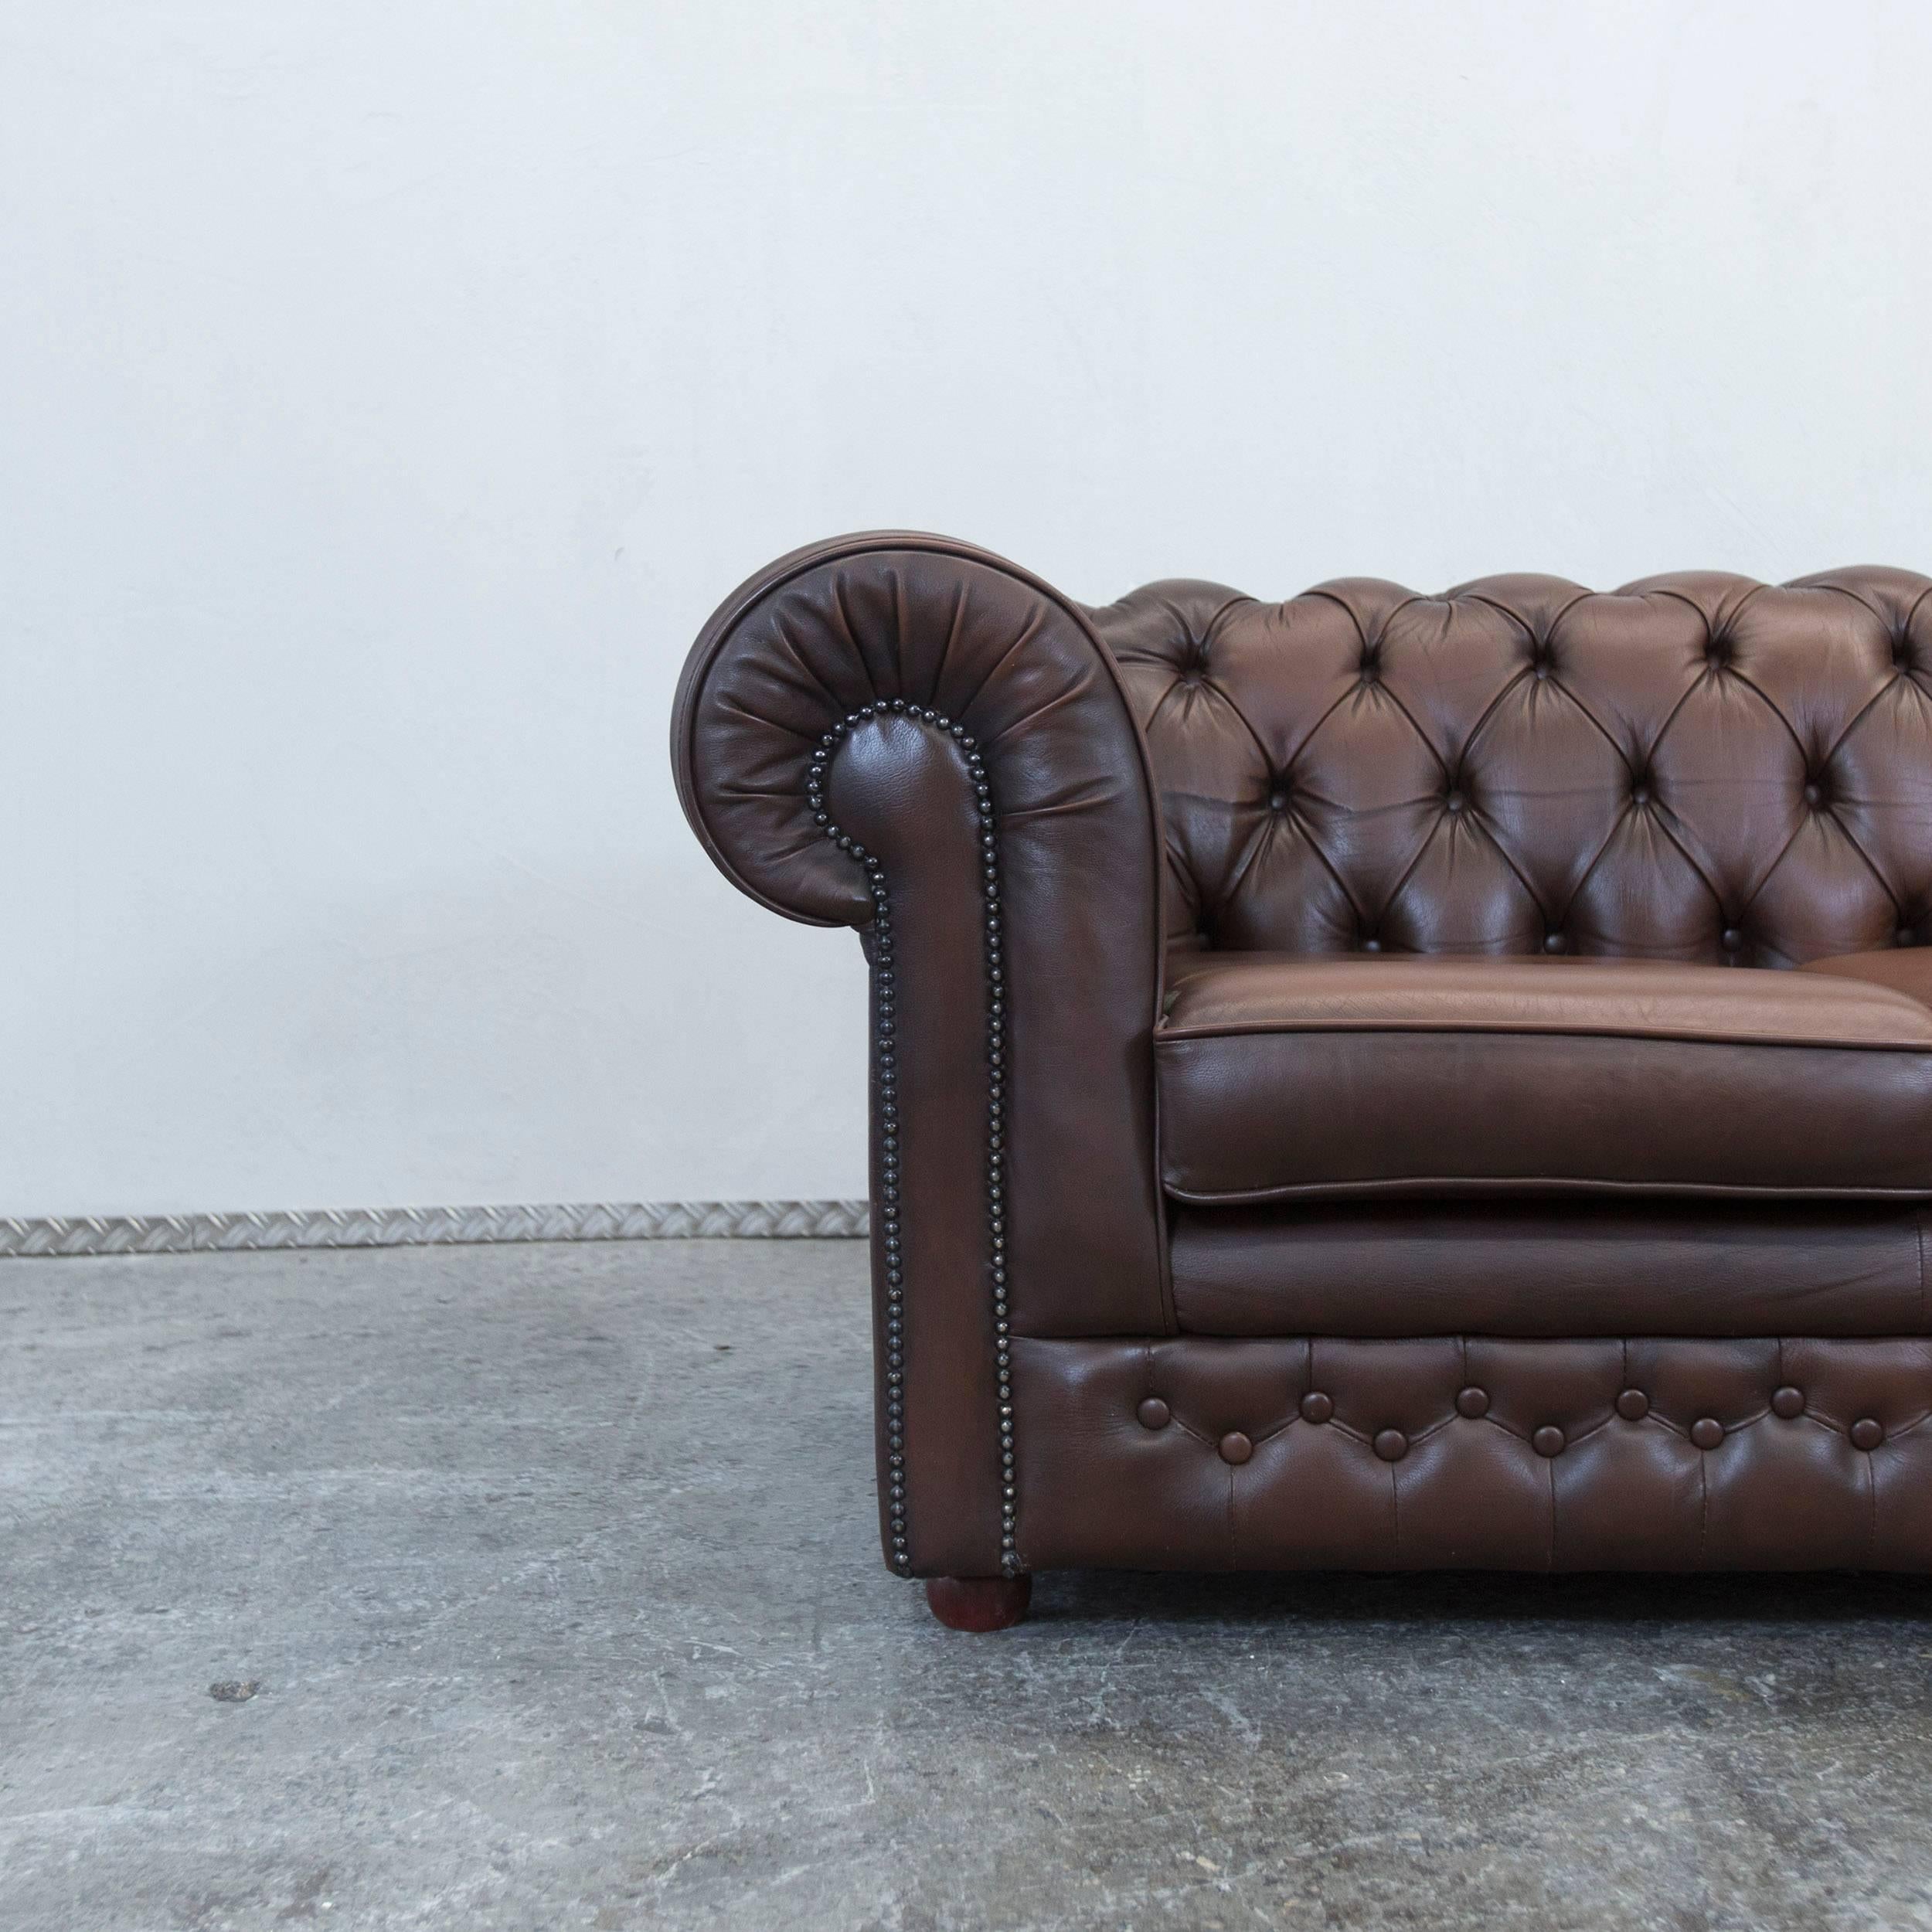 Brown colored original Thomas Lloyd Chesterfield leather sofa in a vintage style, made for pure comfort and elegance.